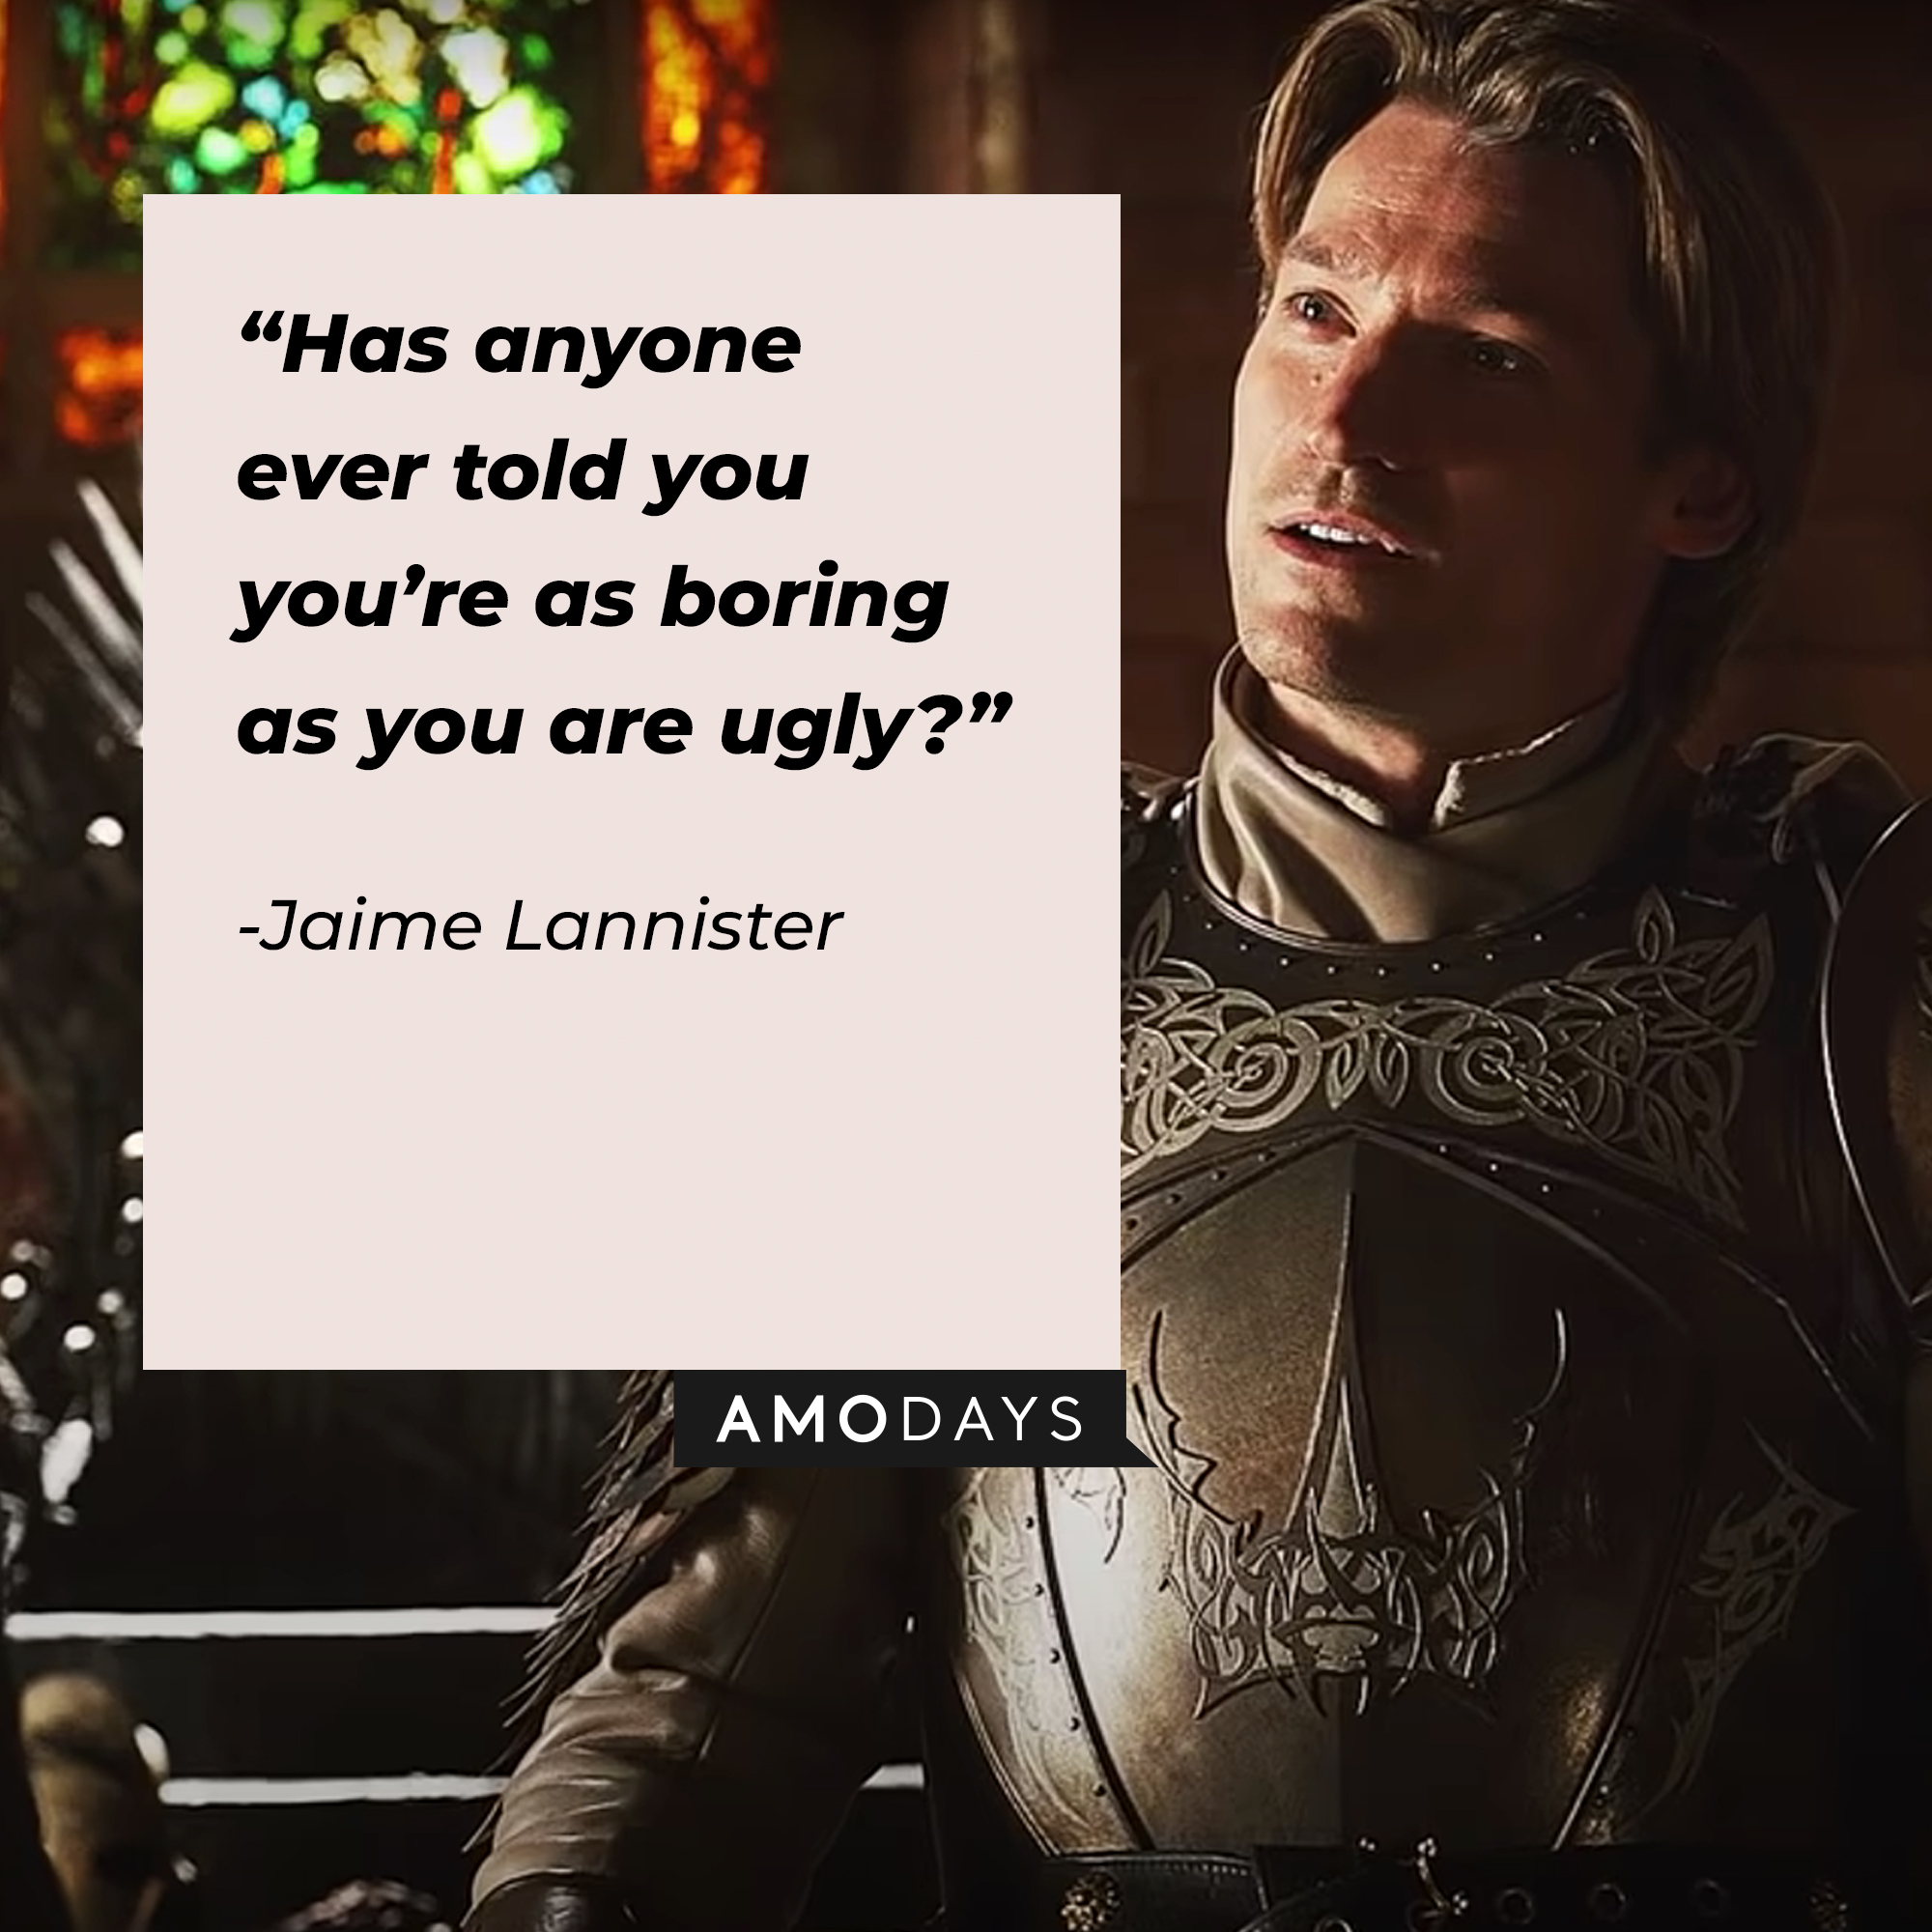 An image of Jaime Lannister, played by Nikolaj Coster-Waldau, with his quote: “Has anyone ever told you you’re as boring as you are ugly?” | Source: facebook.com/Game of Thrones